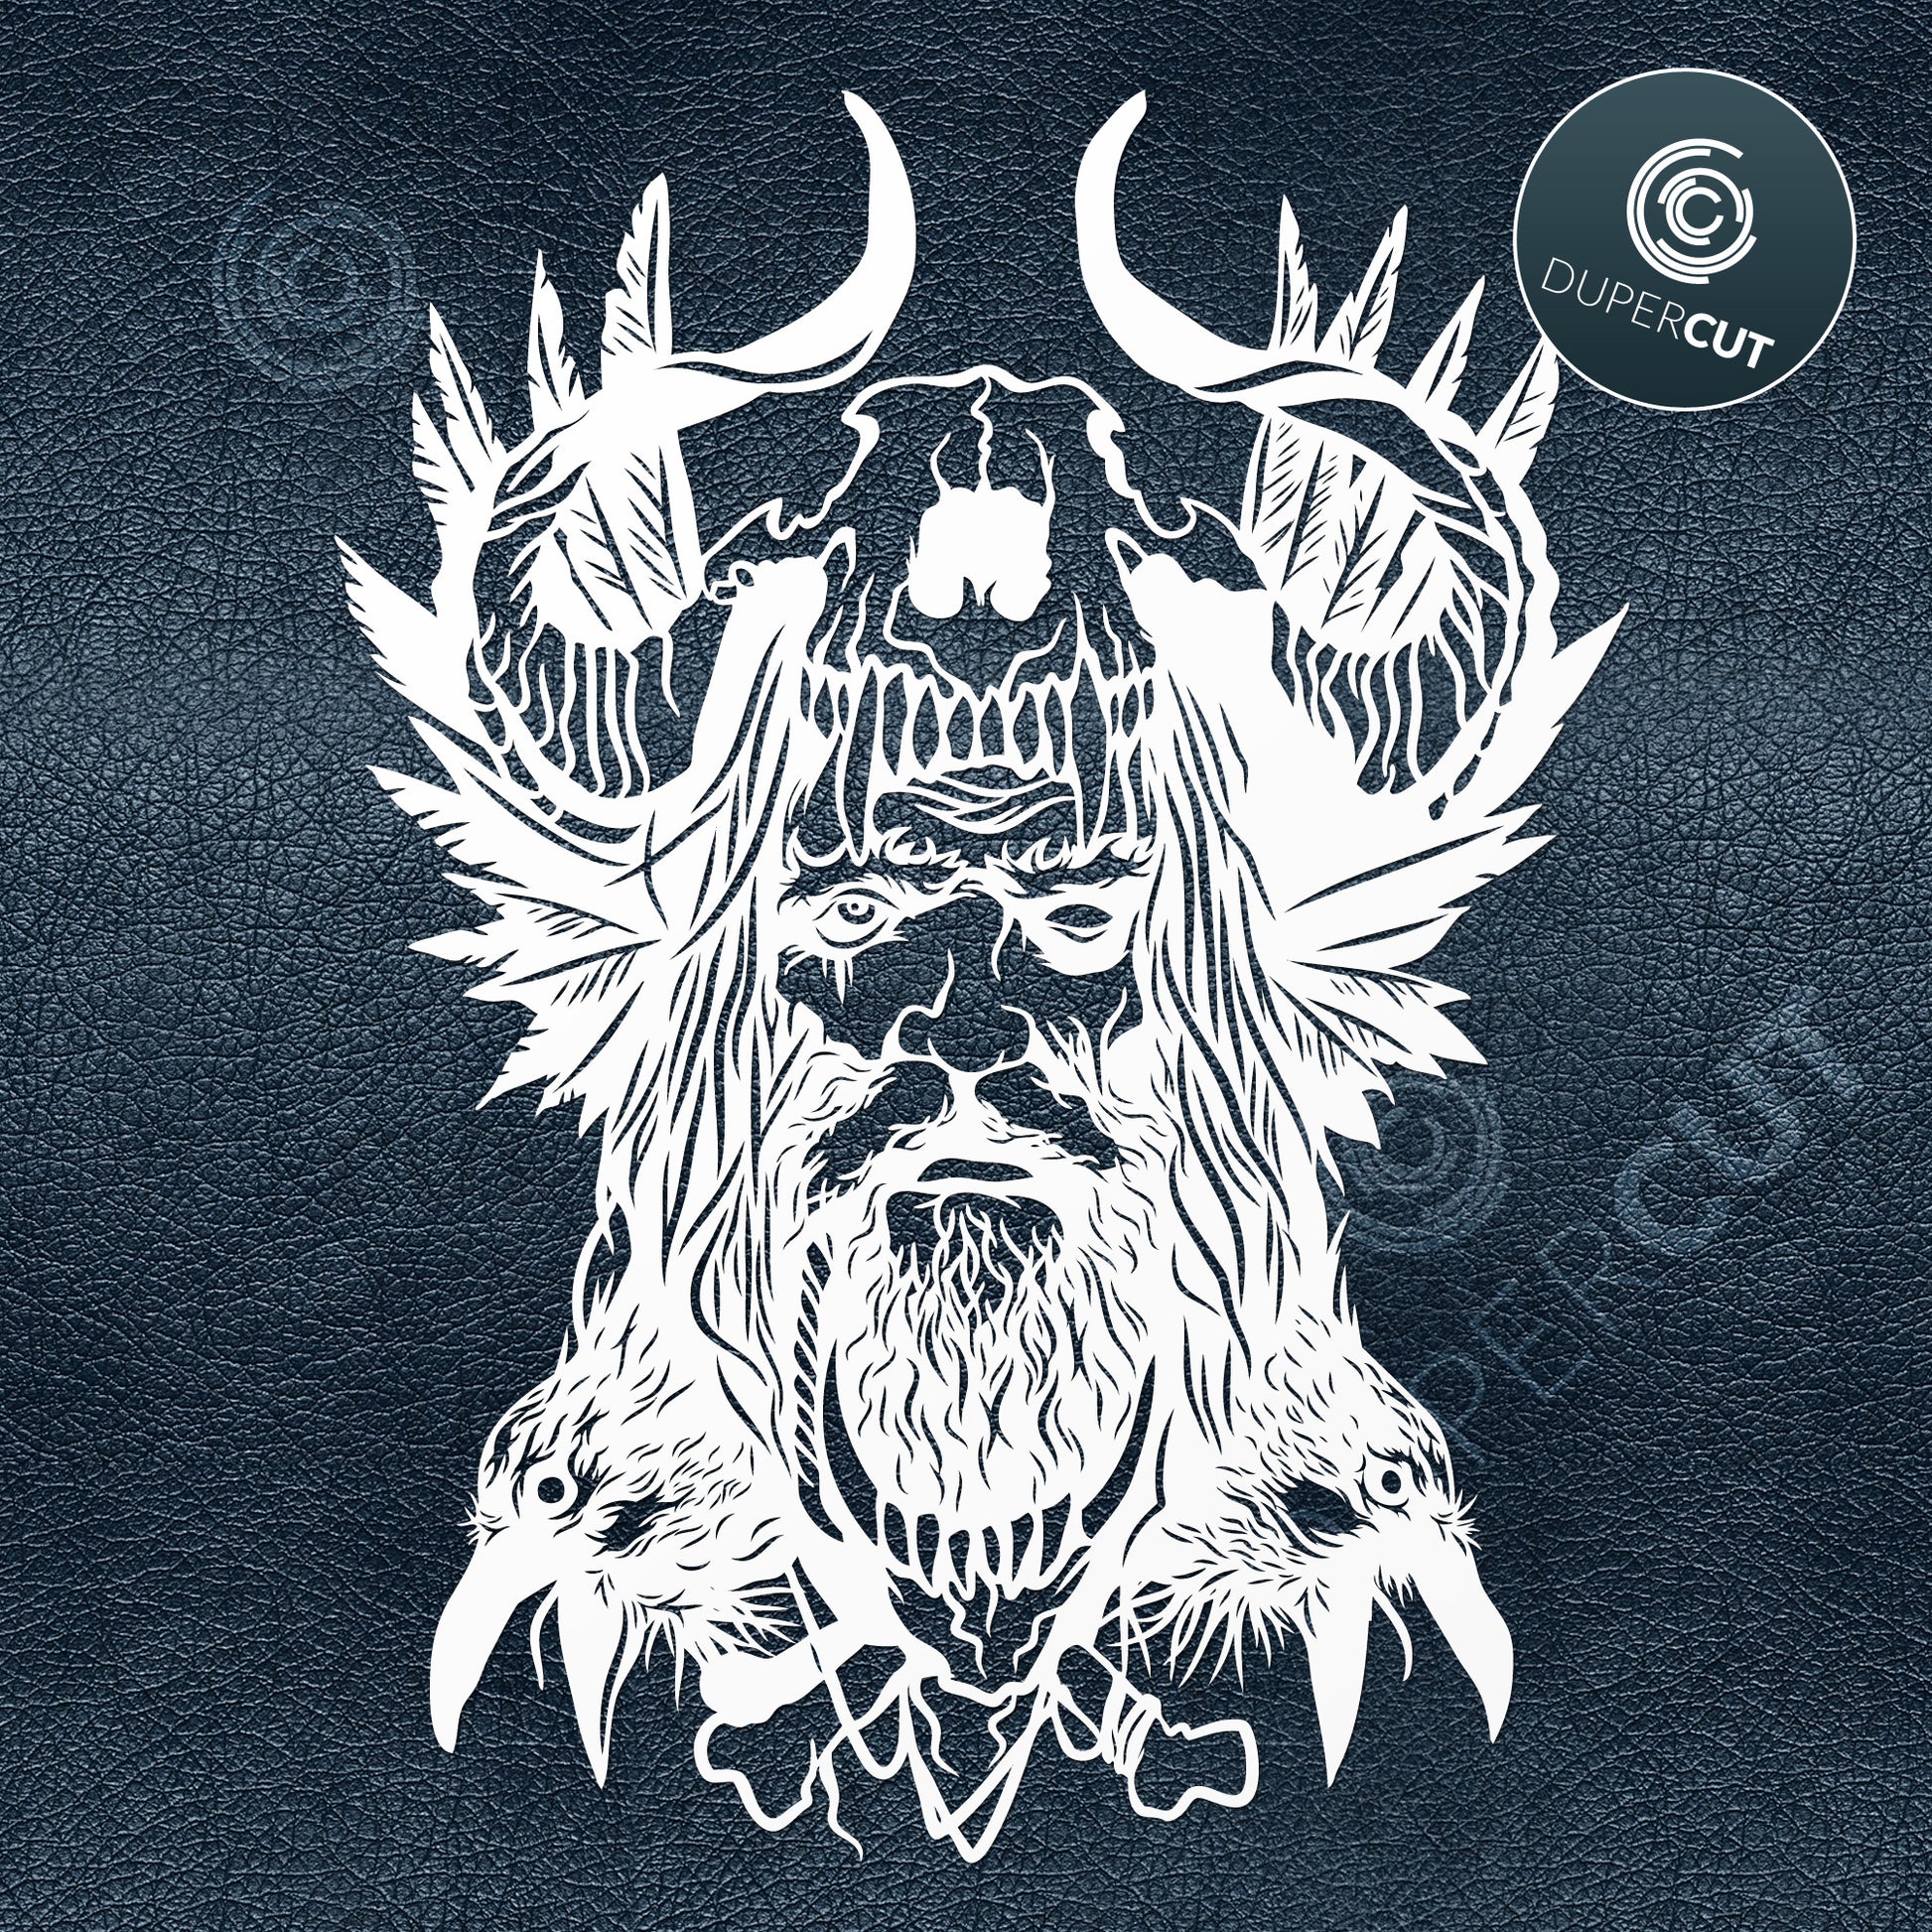 Viking gothic black and white design. Paper cutting template SVG PNG DXF files. For DIY projects Cricut, Glowforge, Silhouette Cameo, CNC Machines.